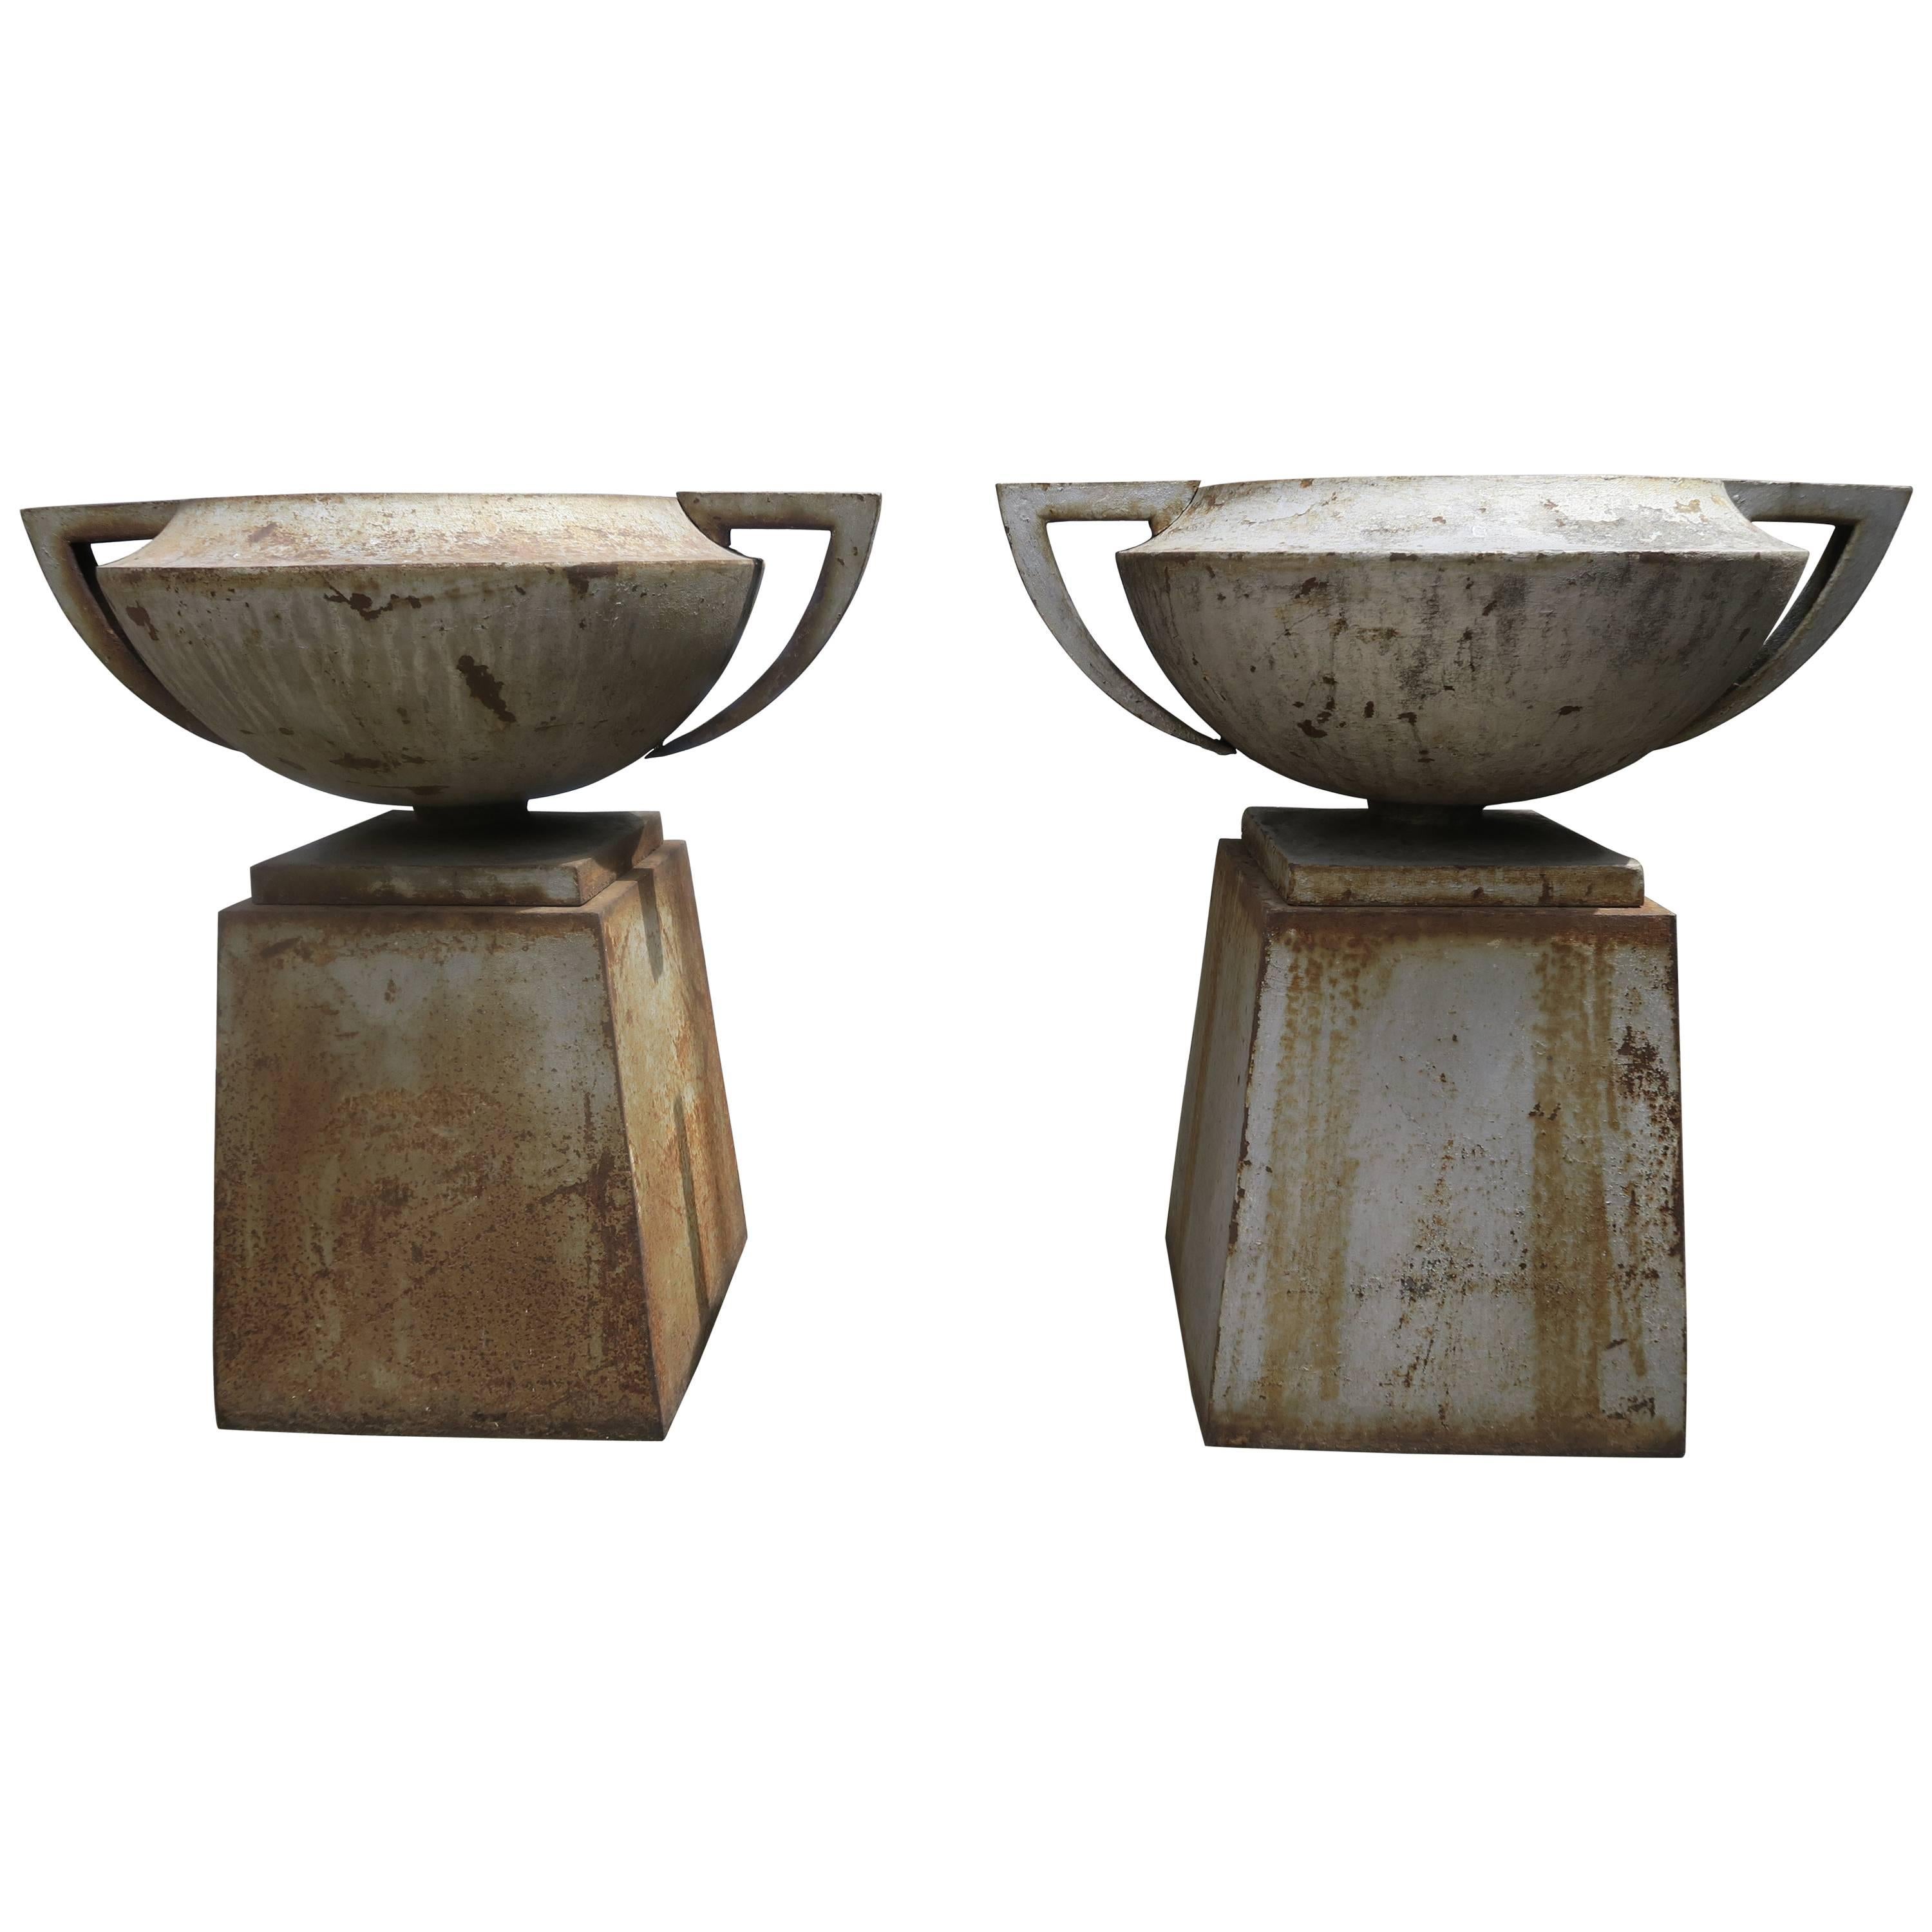 Pair of Deco Cast Iron American Planters with Bases